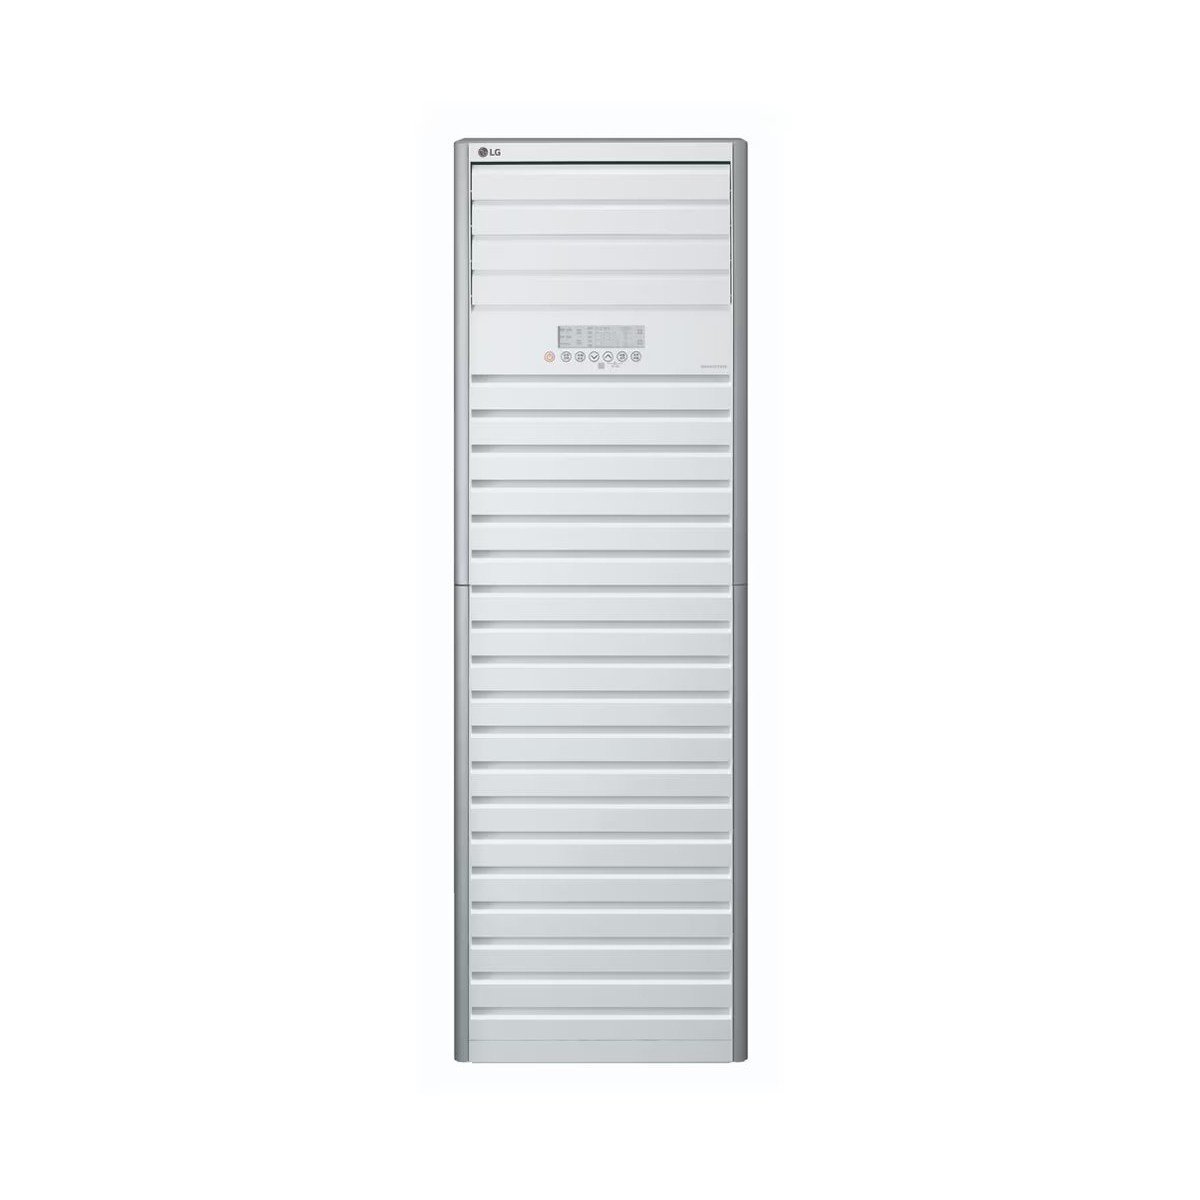 LG - Air condition,Floor Standing, 5HP,cooling & Heating,Inverter,white